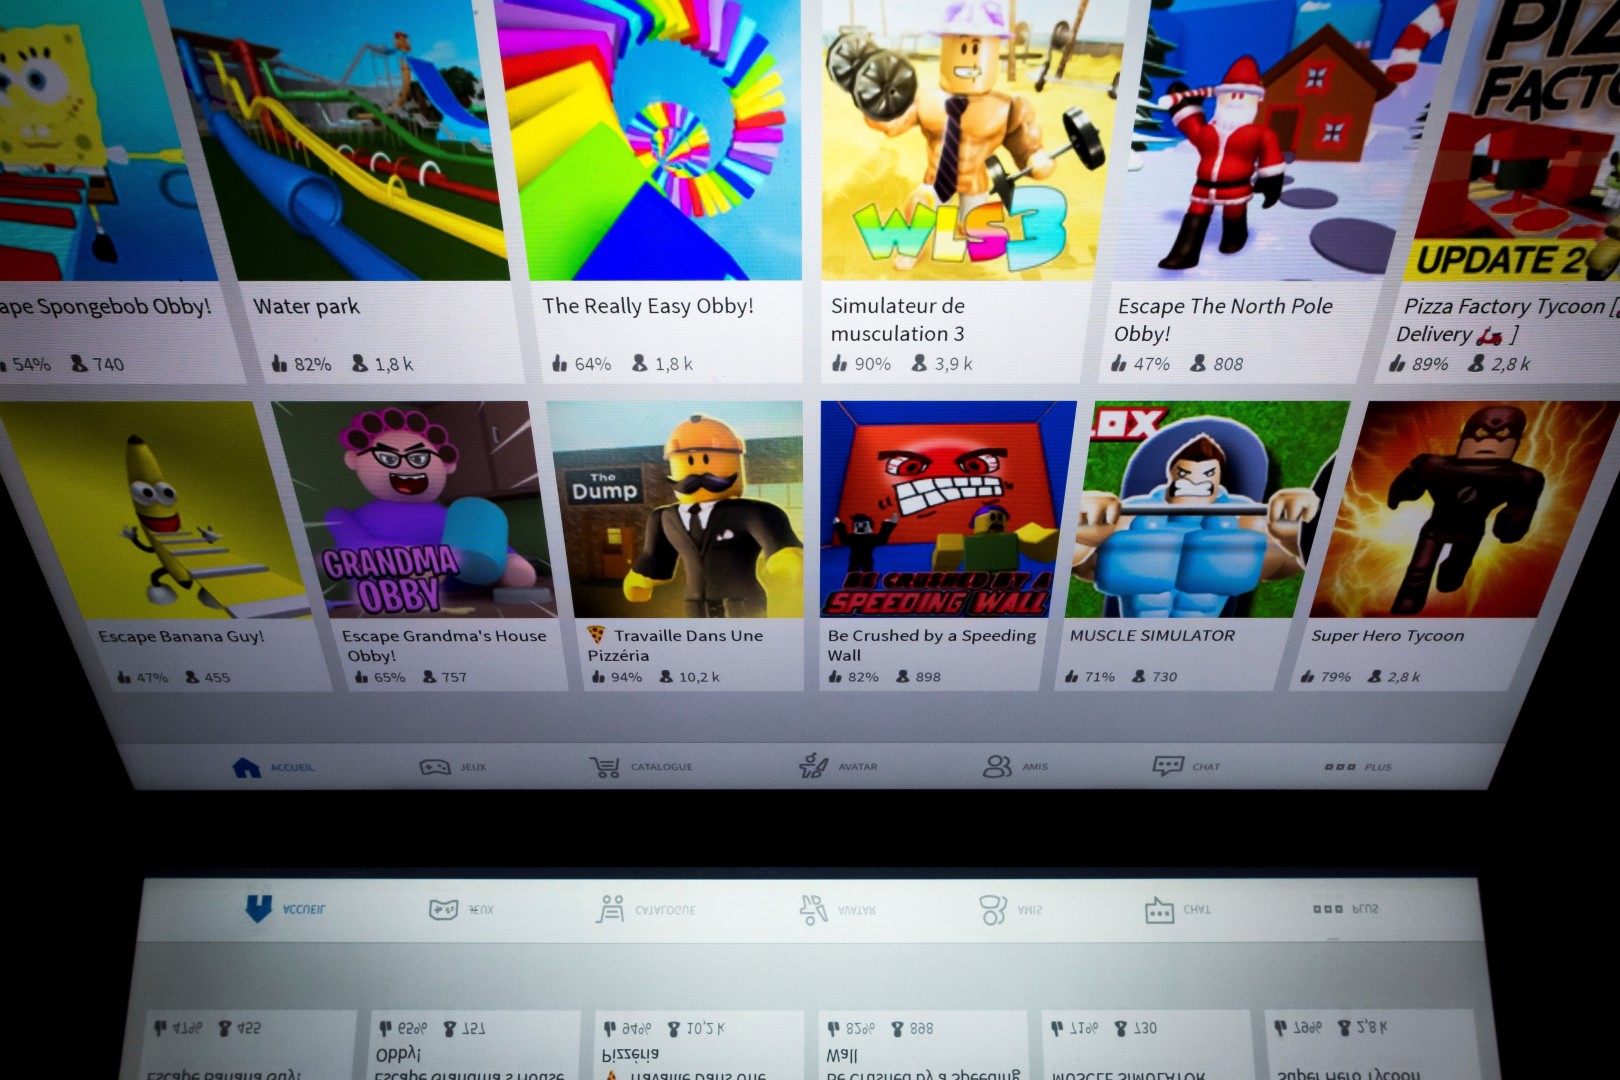 Us Video Game Platform Roblox Files Confidentially To Go Public South China Morning Post - roblox developers page 619